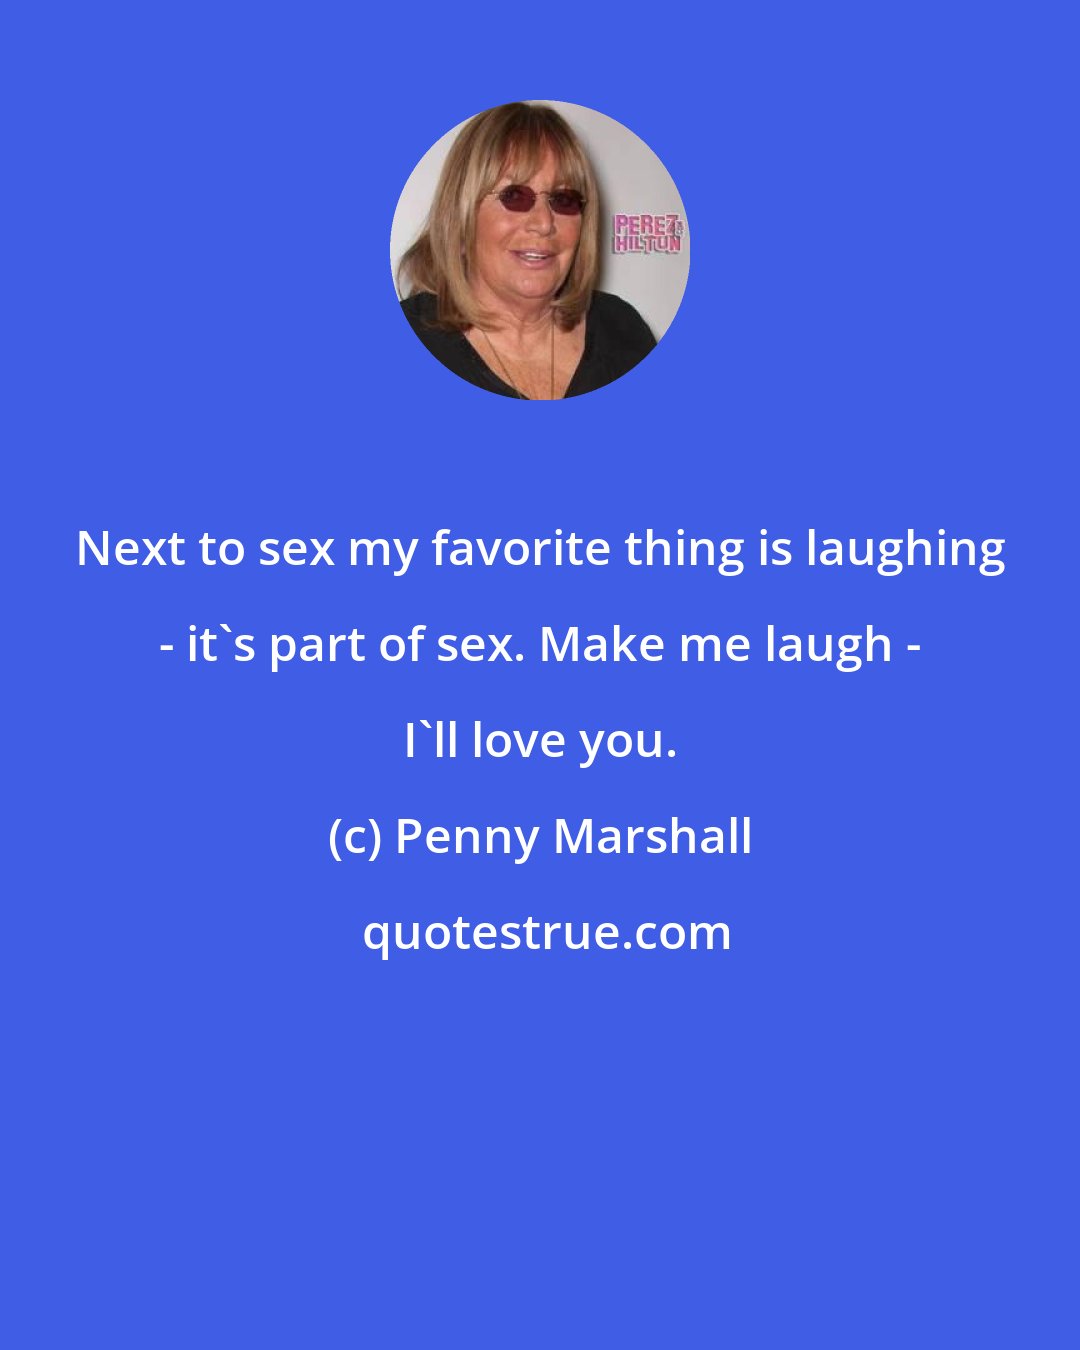 Penny Marshall: Next to sex my favorite thing is laughing - it's part of sex. Make me laugh - I'll love you.